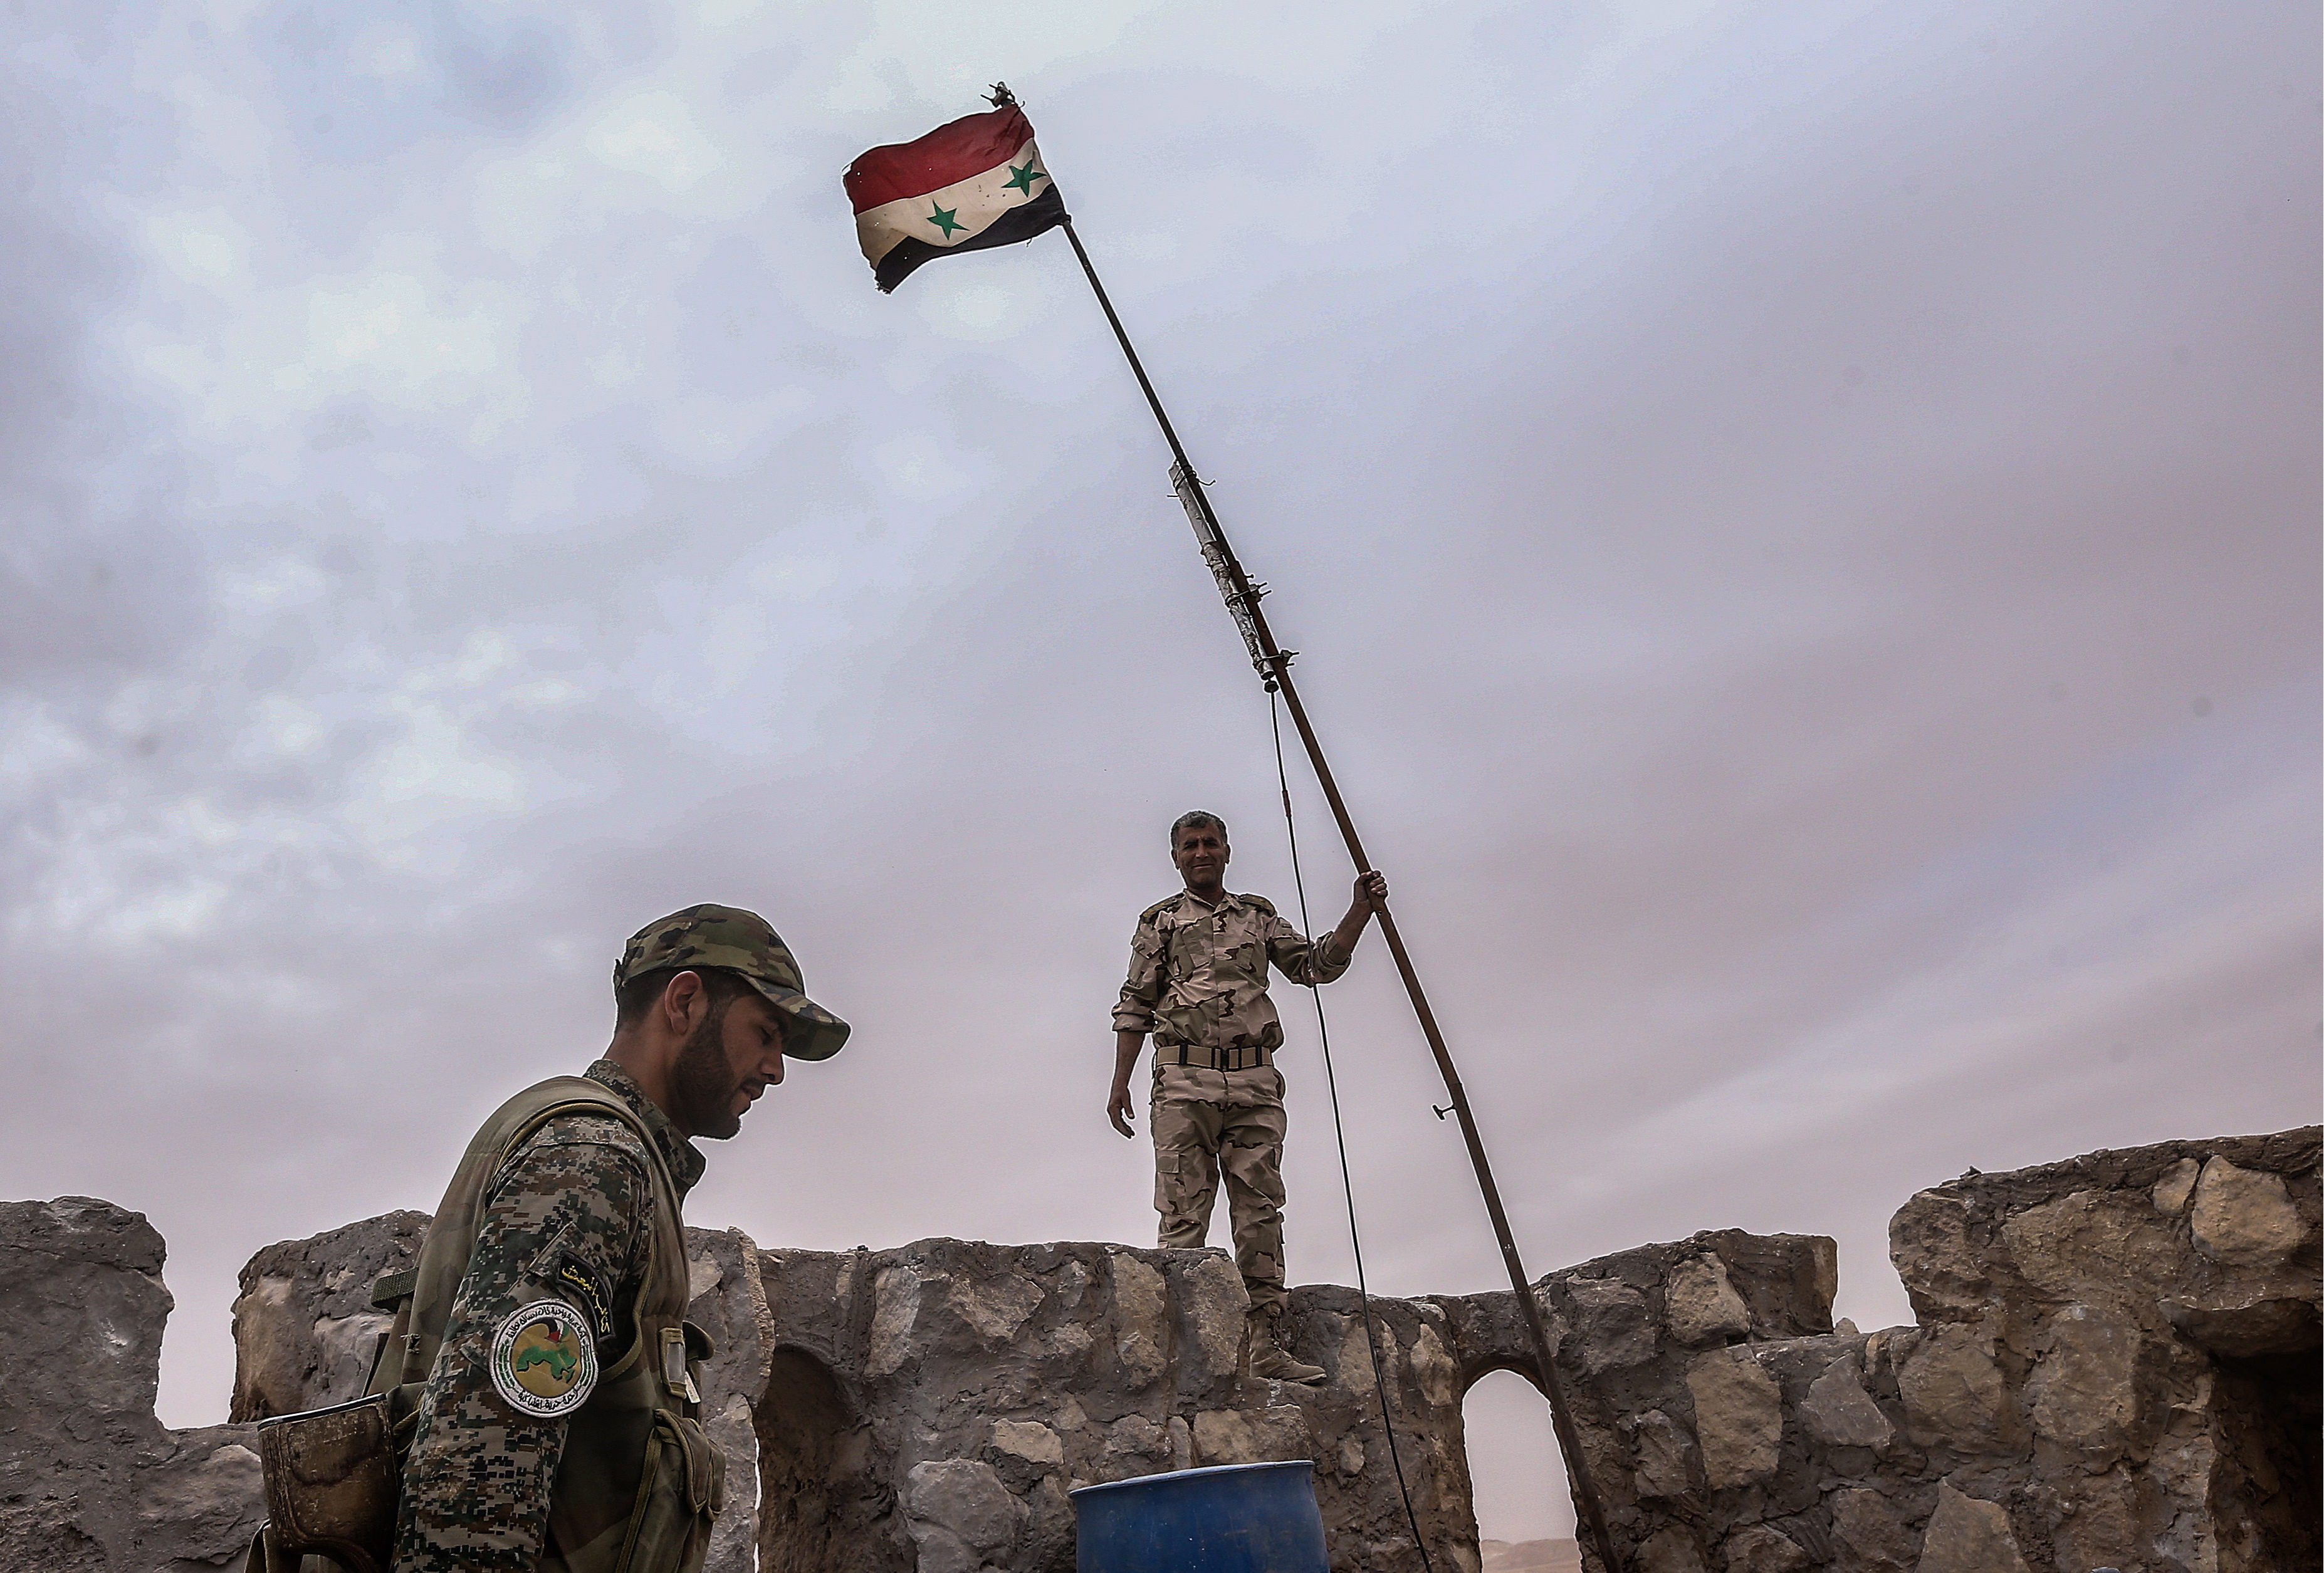 Syrian government army soldiers put a flag on top of Fakhr al-Din al-Maani Citadel, in Palmyra, Syria, on March 26, 2016. (Valery Sharifulin—TASS/Getty Images)